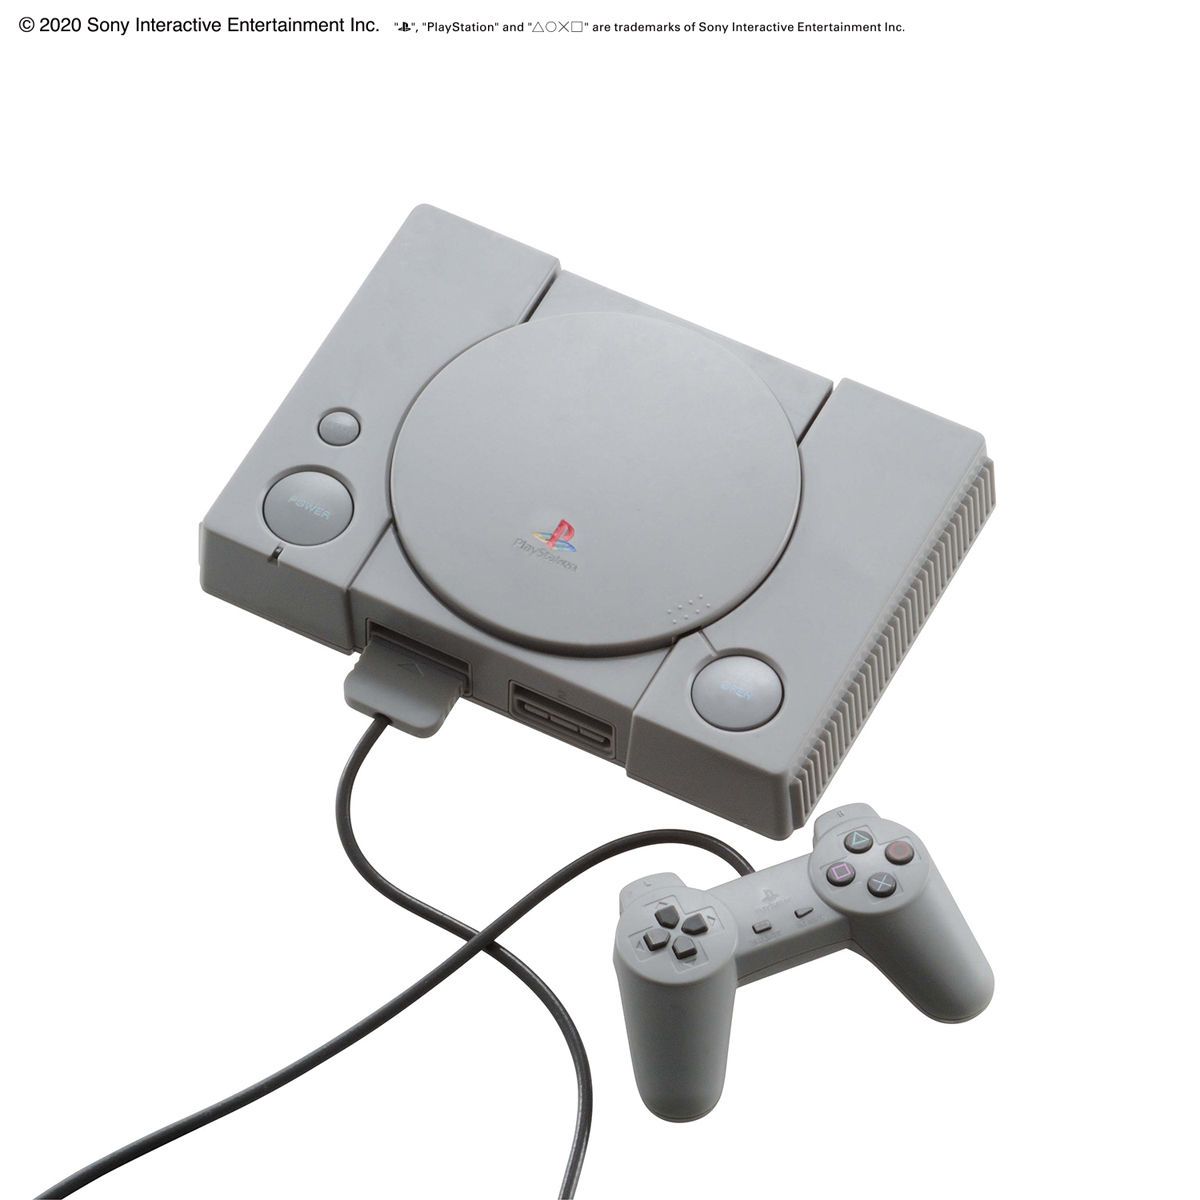 Best Hit Chronicle 2/5 `PlayStation` (SCPH-1000)